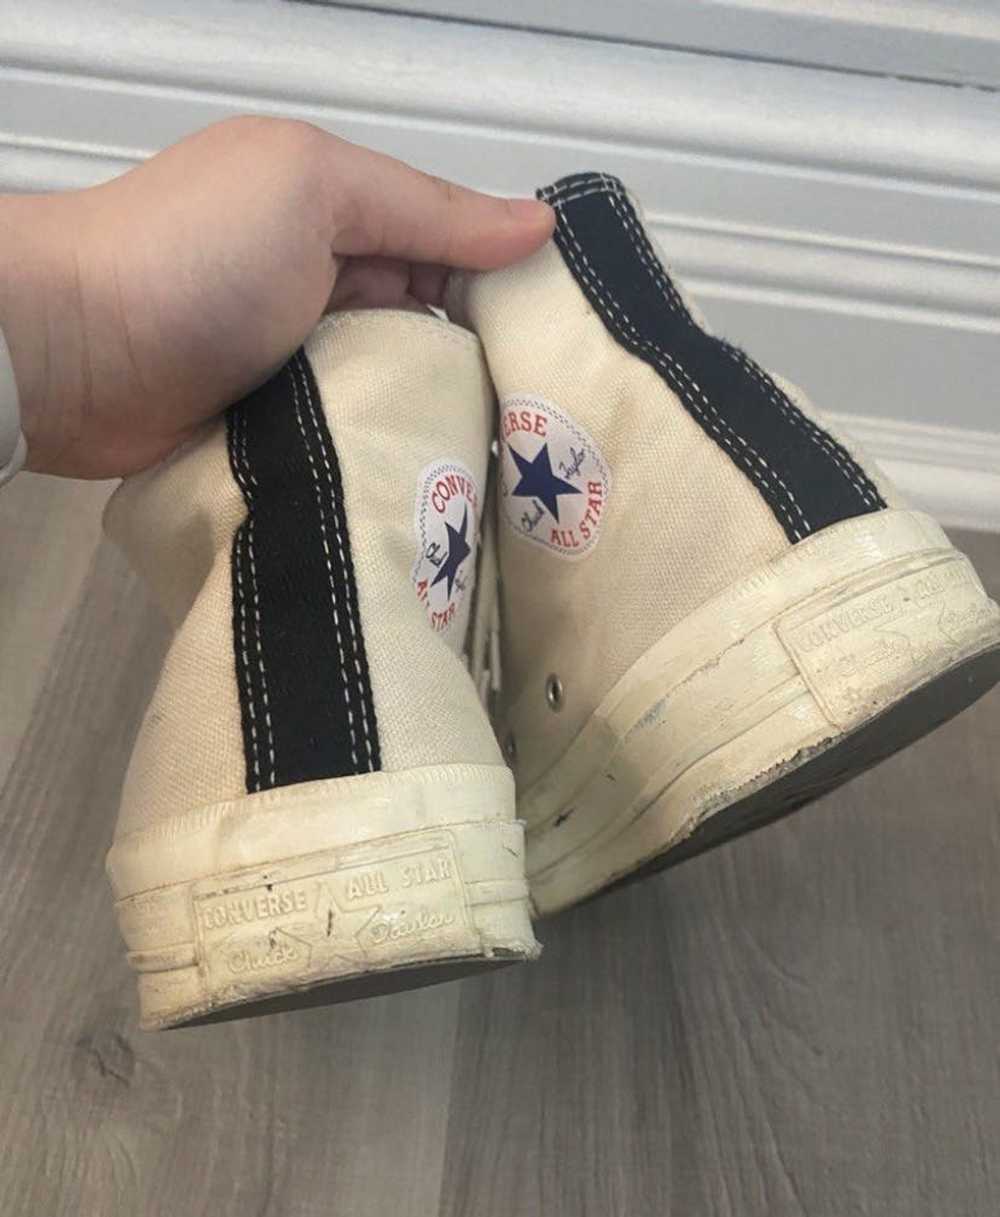 Comme des Garcons CDG High Top Sneakers - image 3